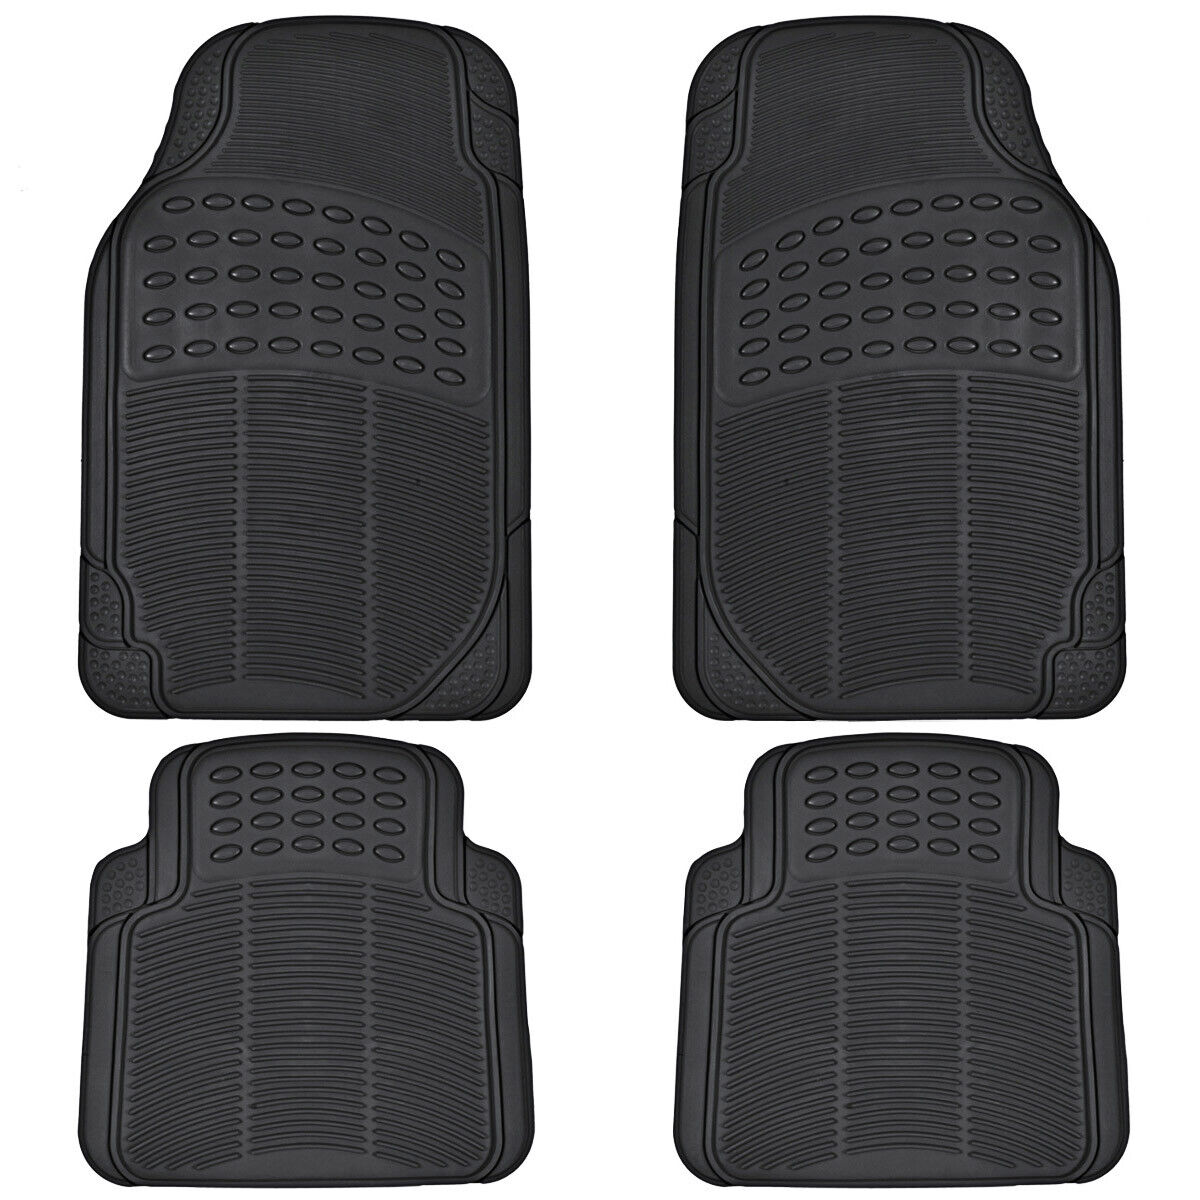 Car Rubber Floor Mats for All Weather Sedan SUV Truck 4 PC Set Trimmable Black